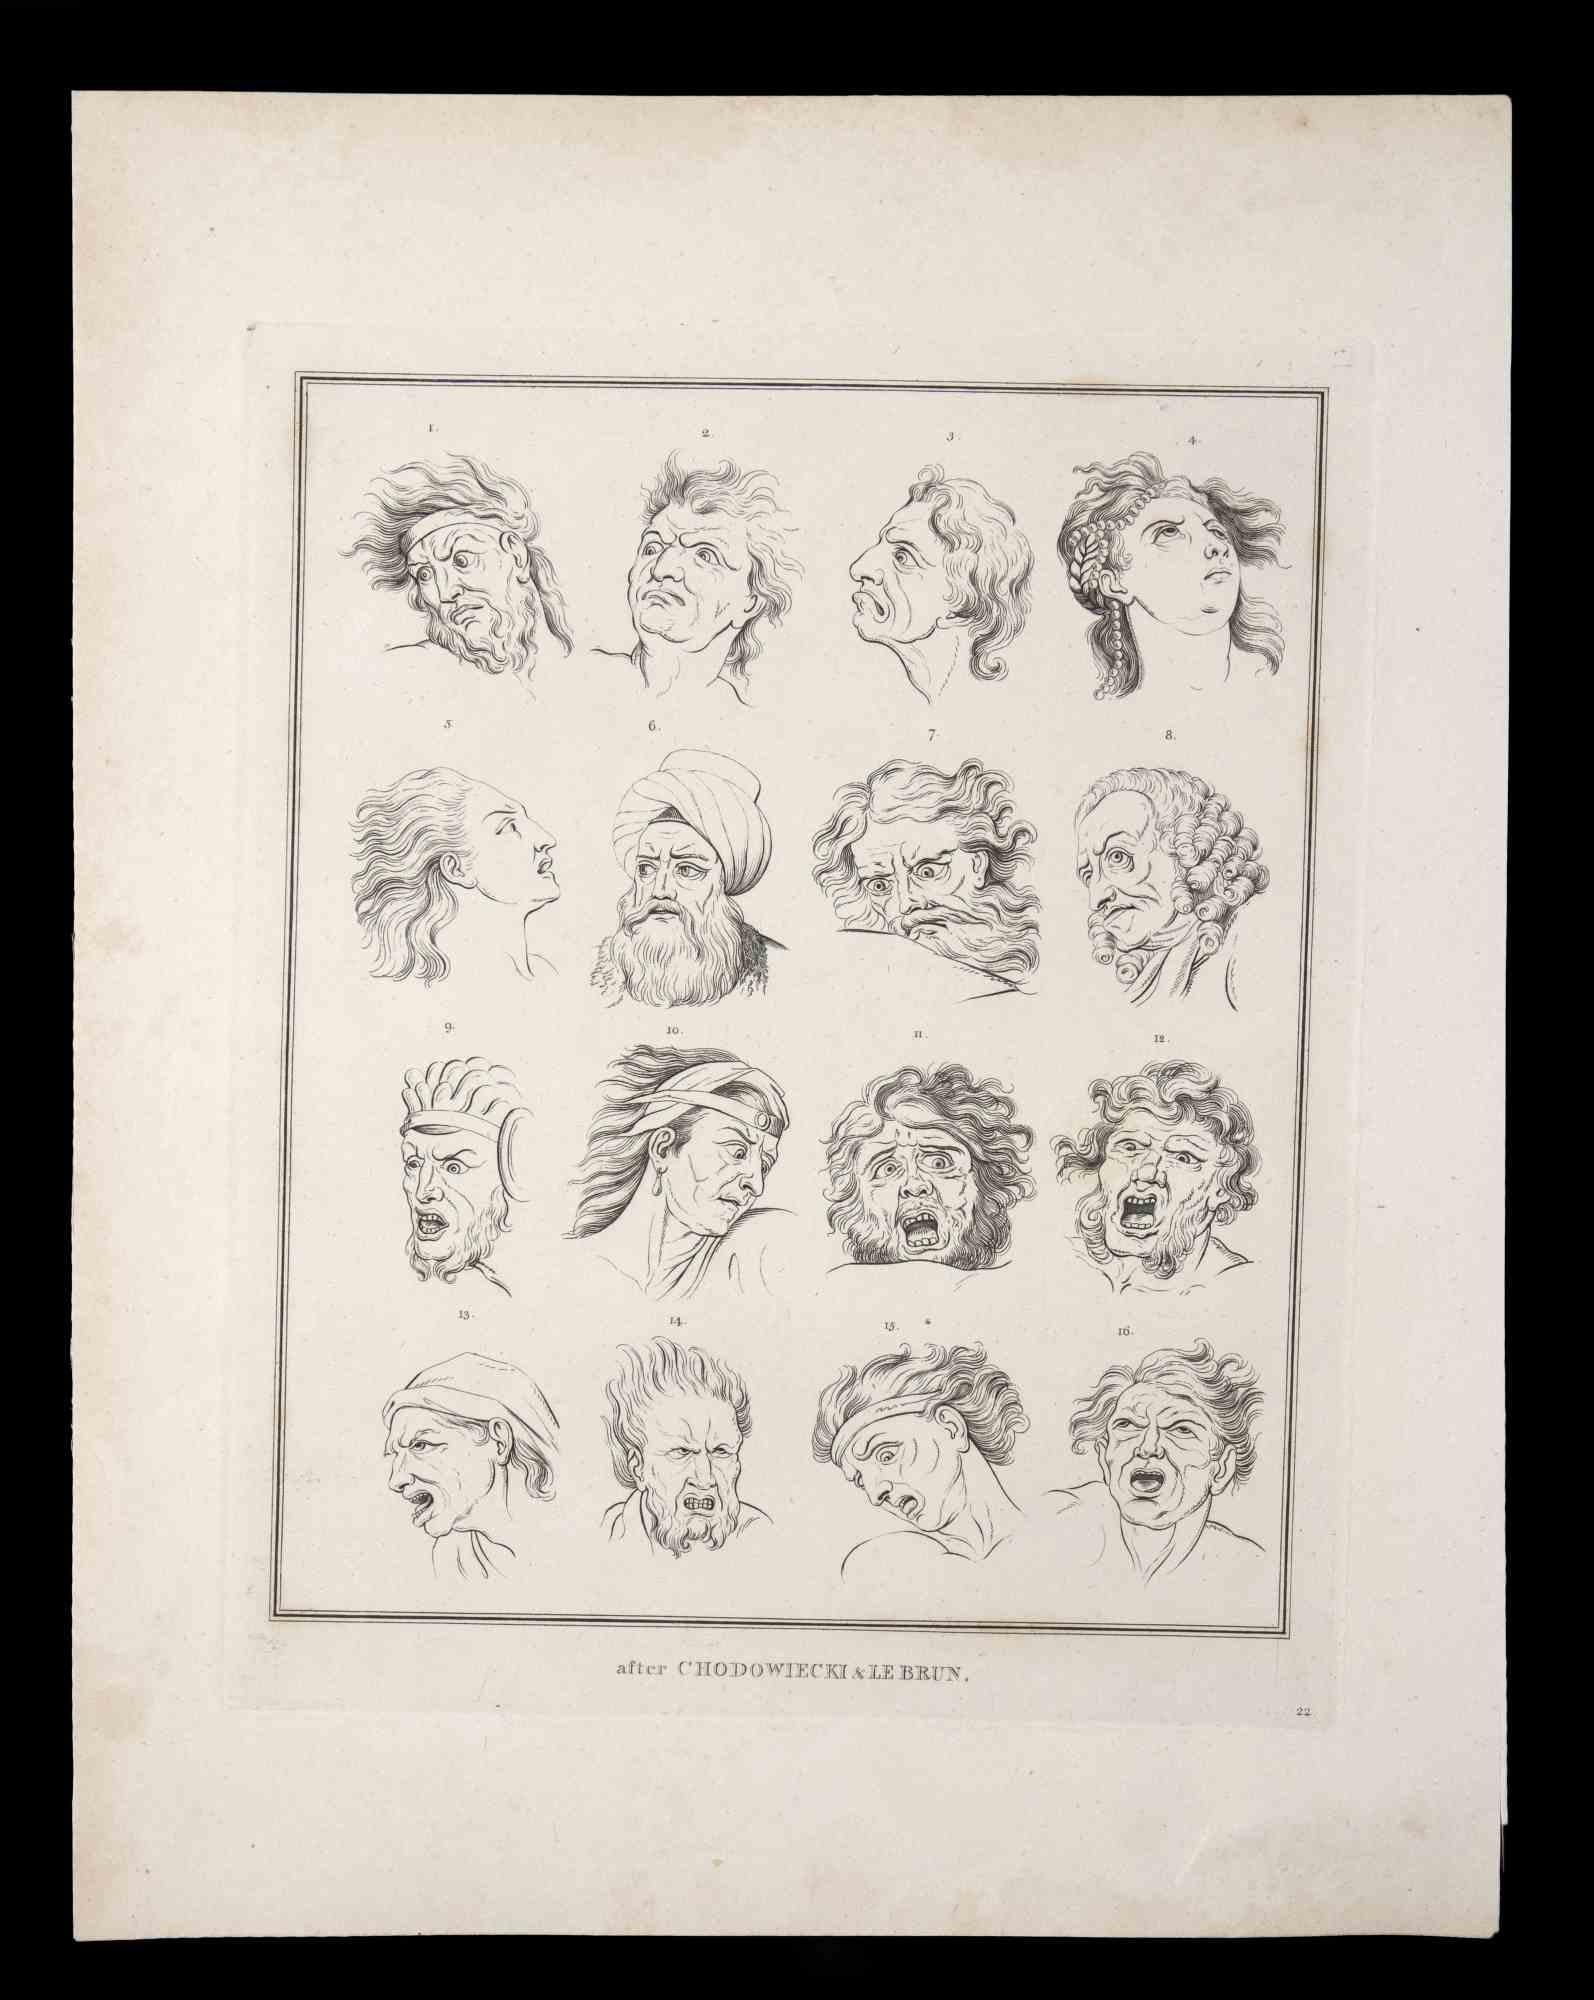 Portrait of men and women is an original etching artwork realized by Thomas Holloway after Lebrun and Chodowiecki for Johann Caspar Lavater's "Essays on Physiognomy, Designed to Promote the Knowledge and the Love of Mankind", London, Bensley, 1810.